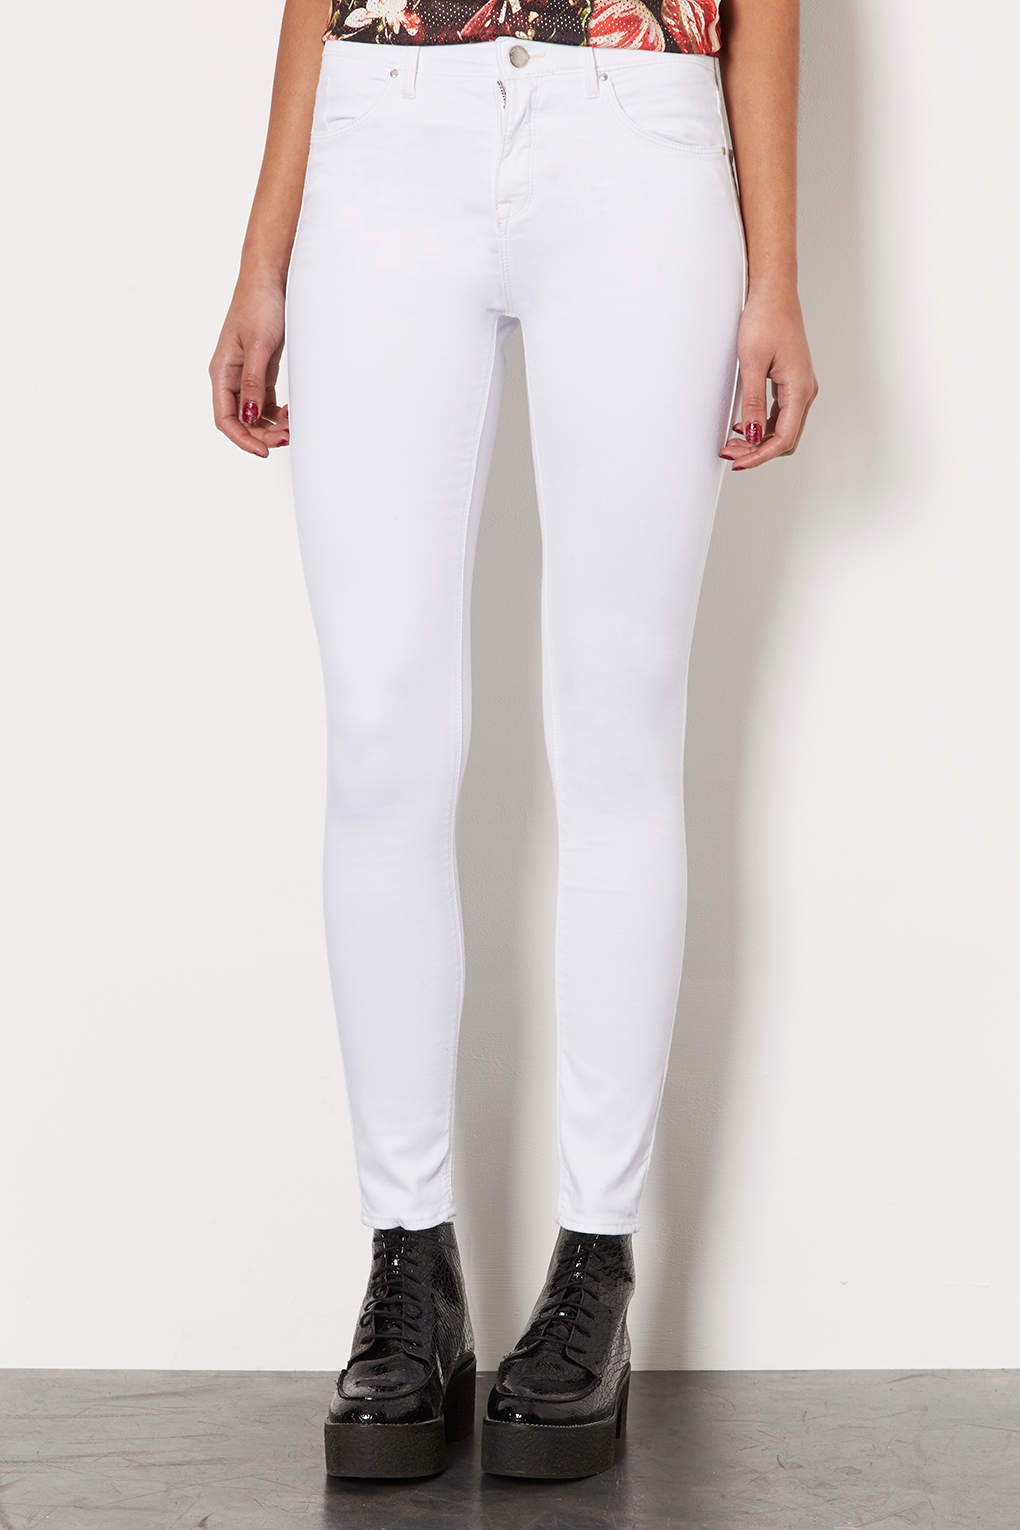 topshop leigh jeans